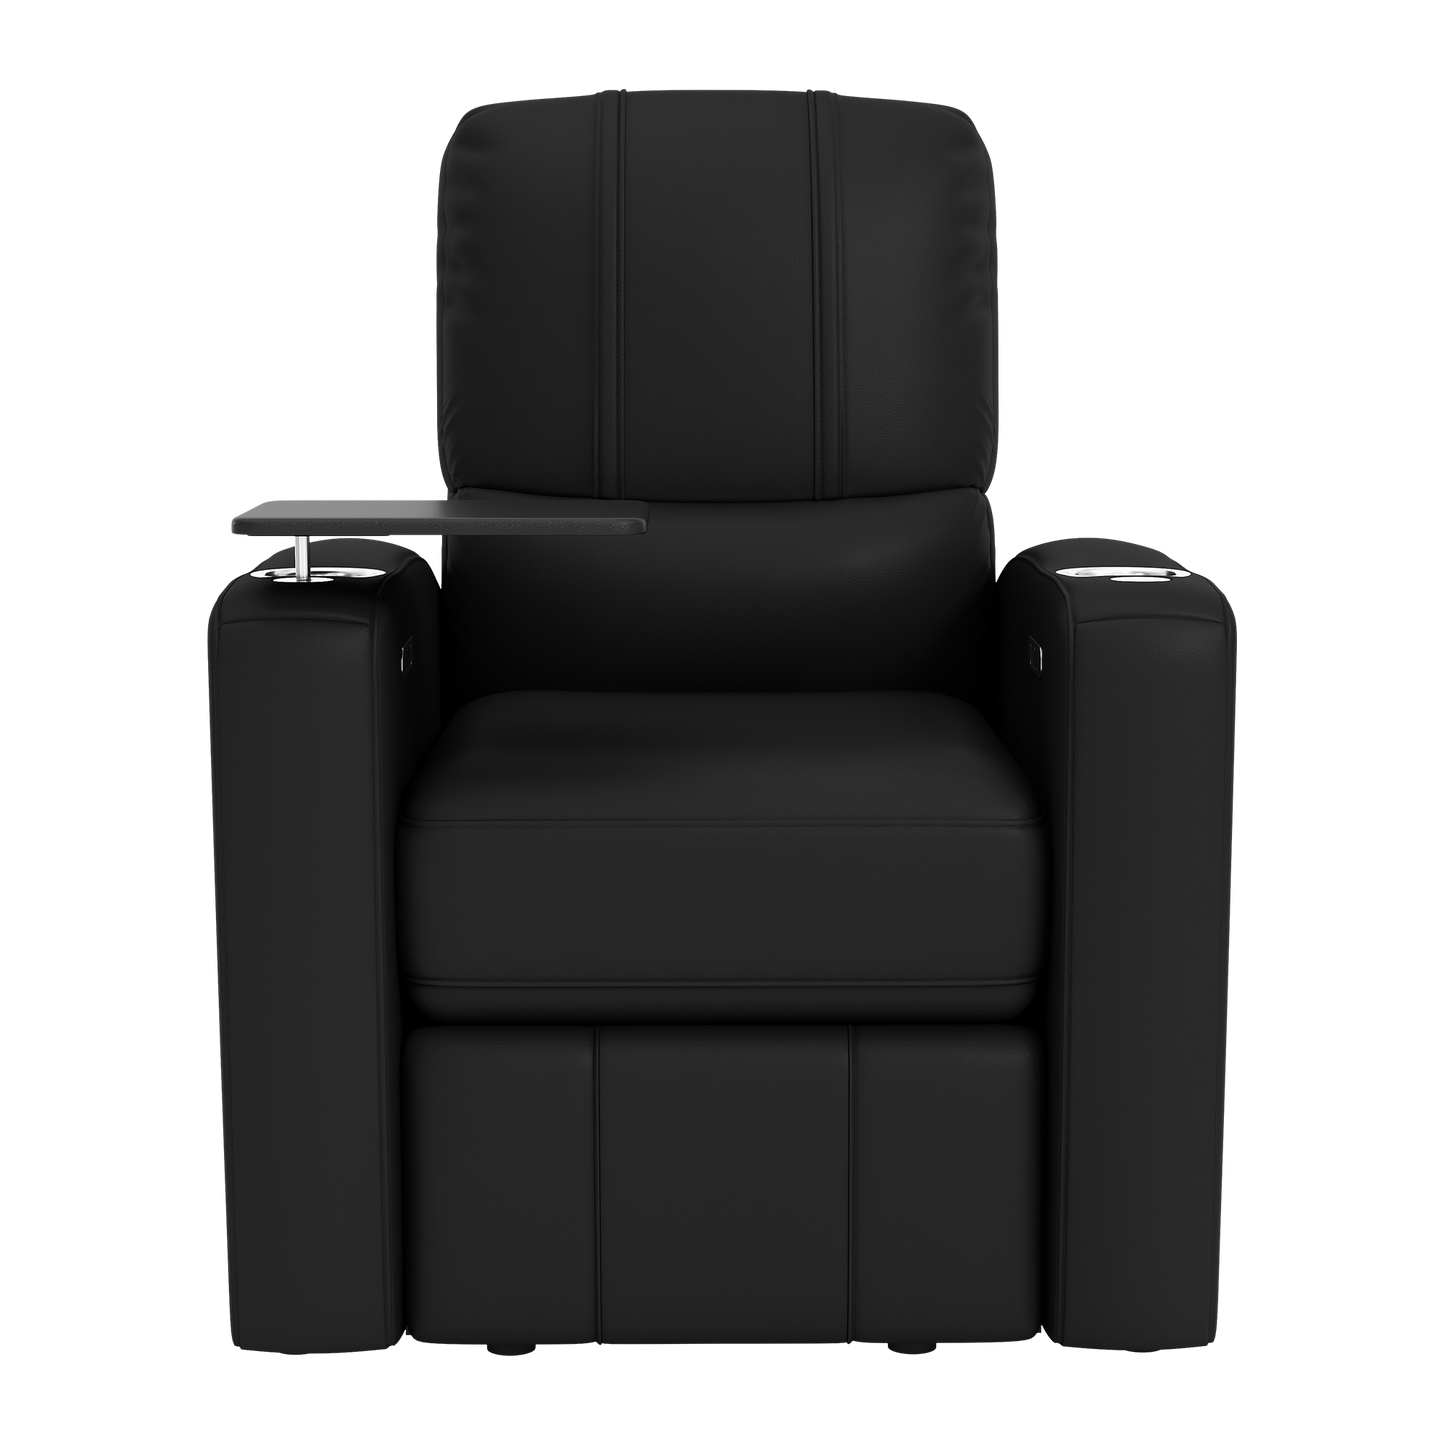 Stealth Power Plus Recliner with Washington Commanders Primary Logo